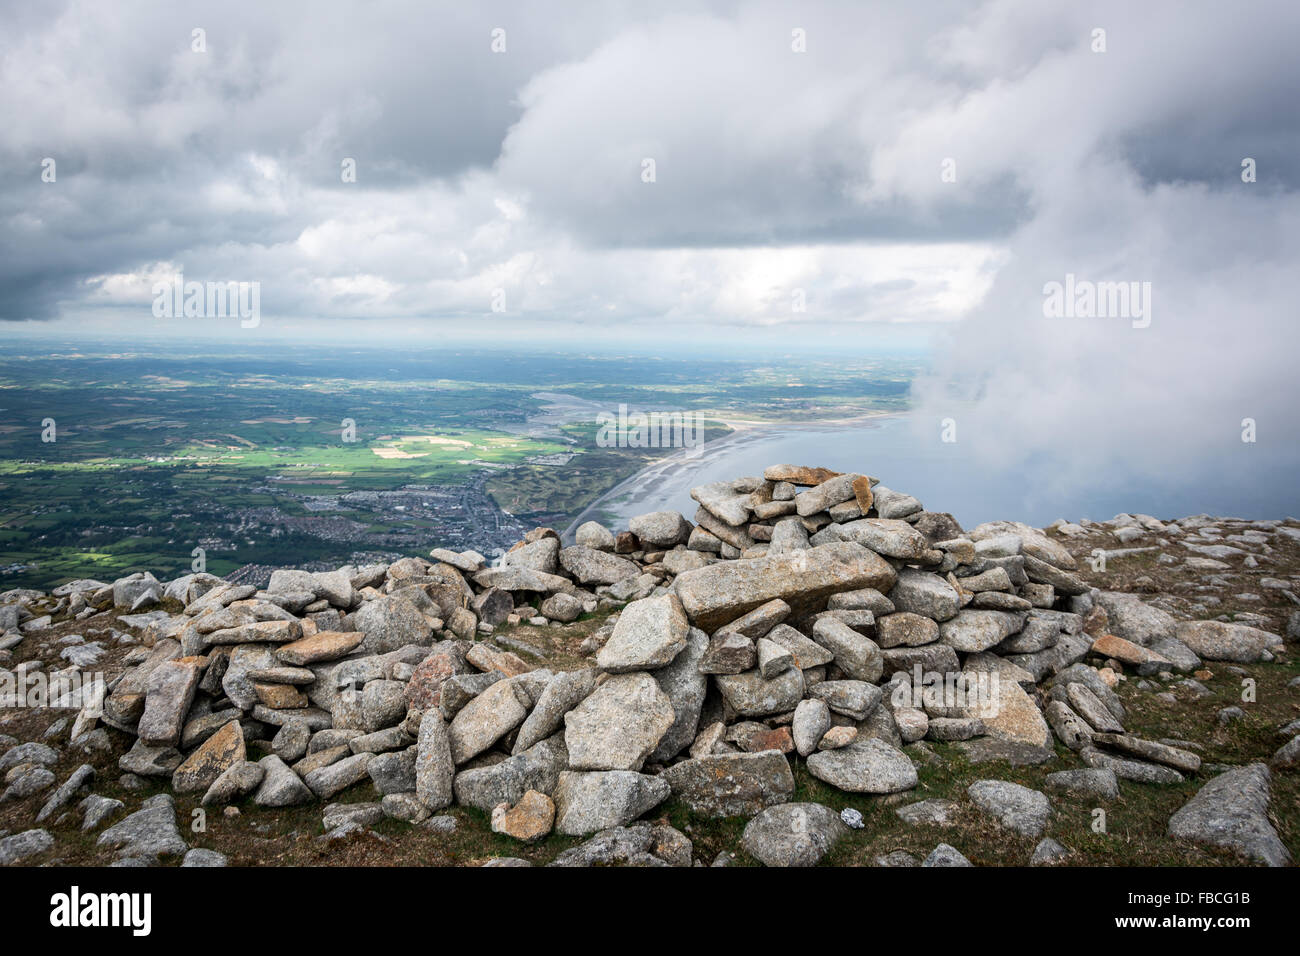 The view over Newcastle, County Down, Ireland from the top of Slieve Donard in the Mourne Mountains Stock Photo